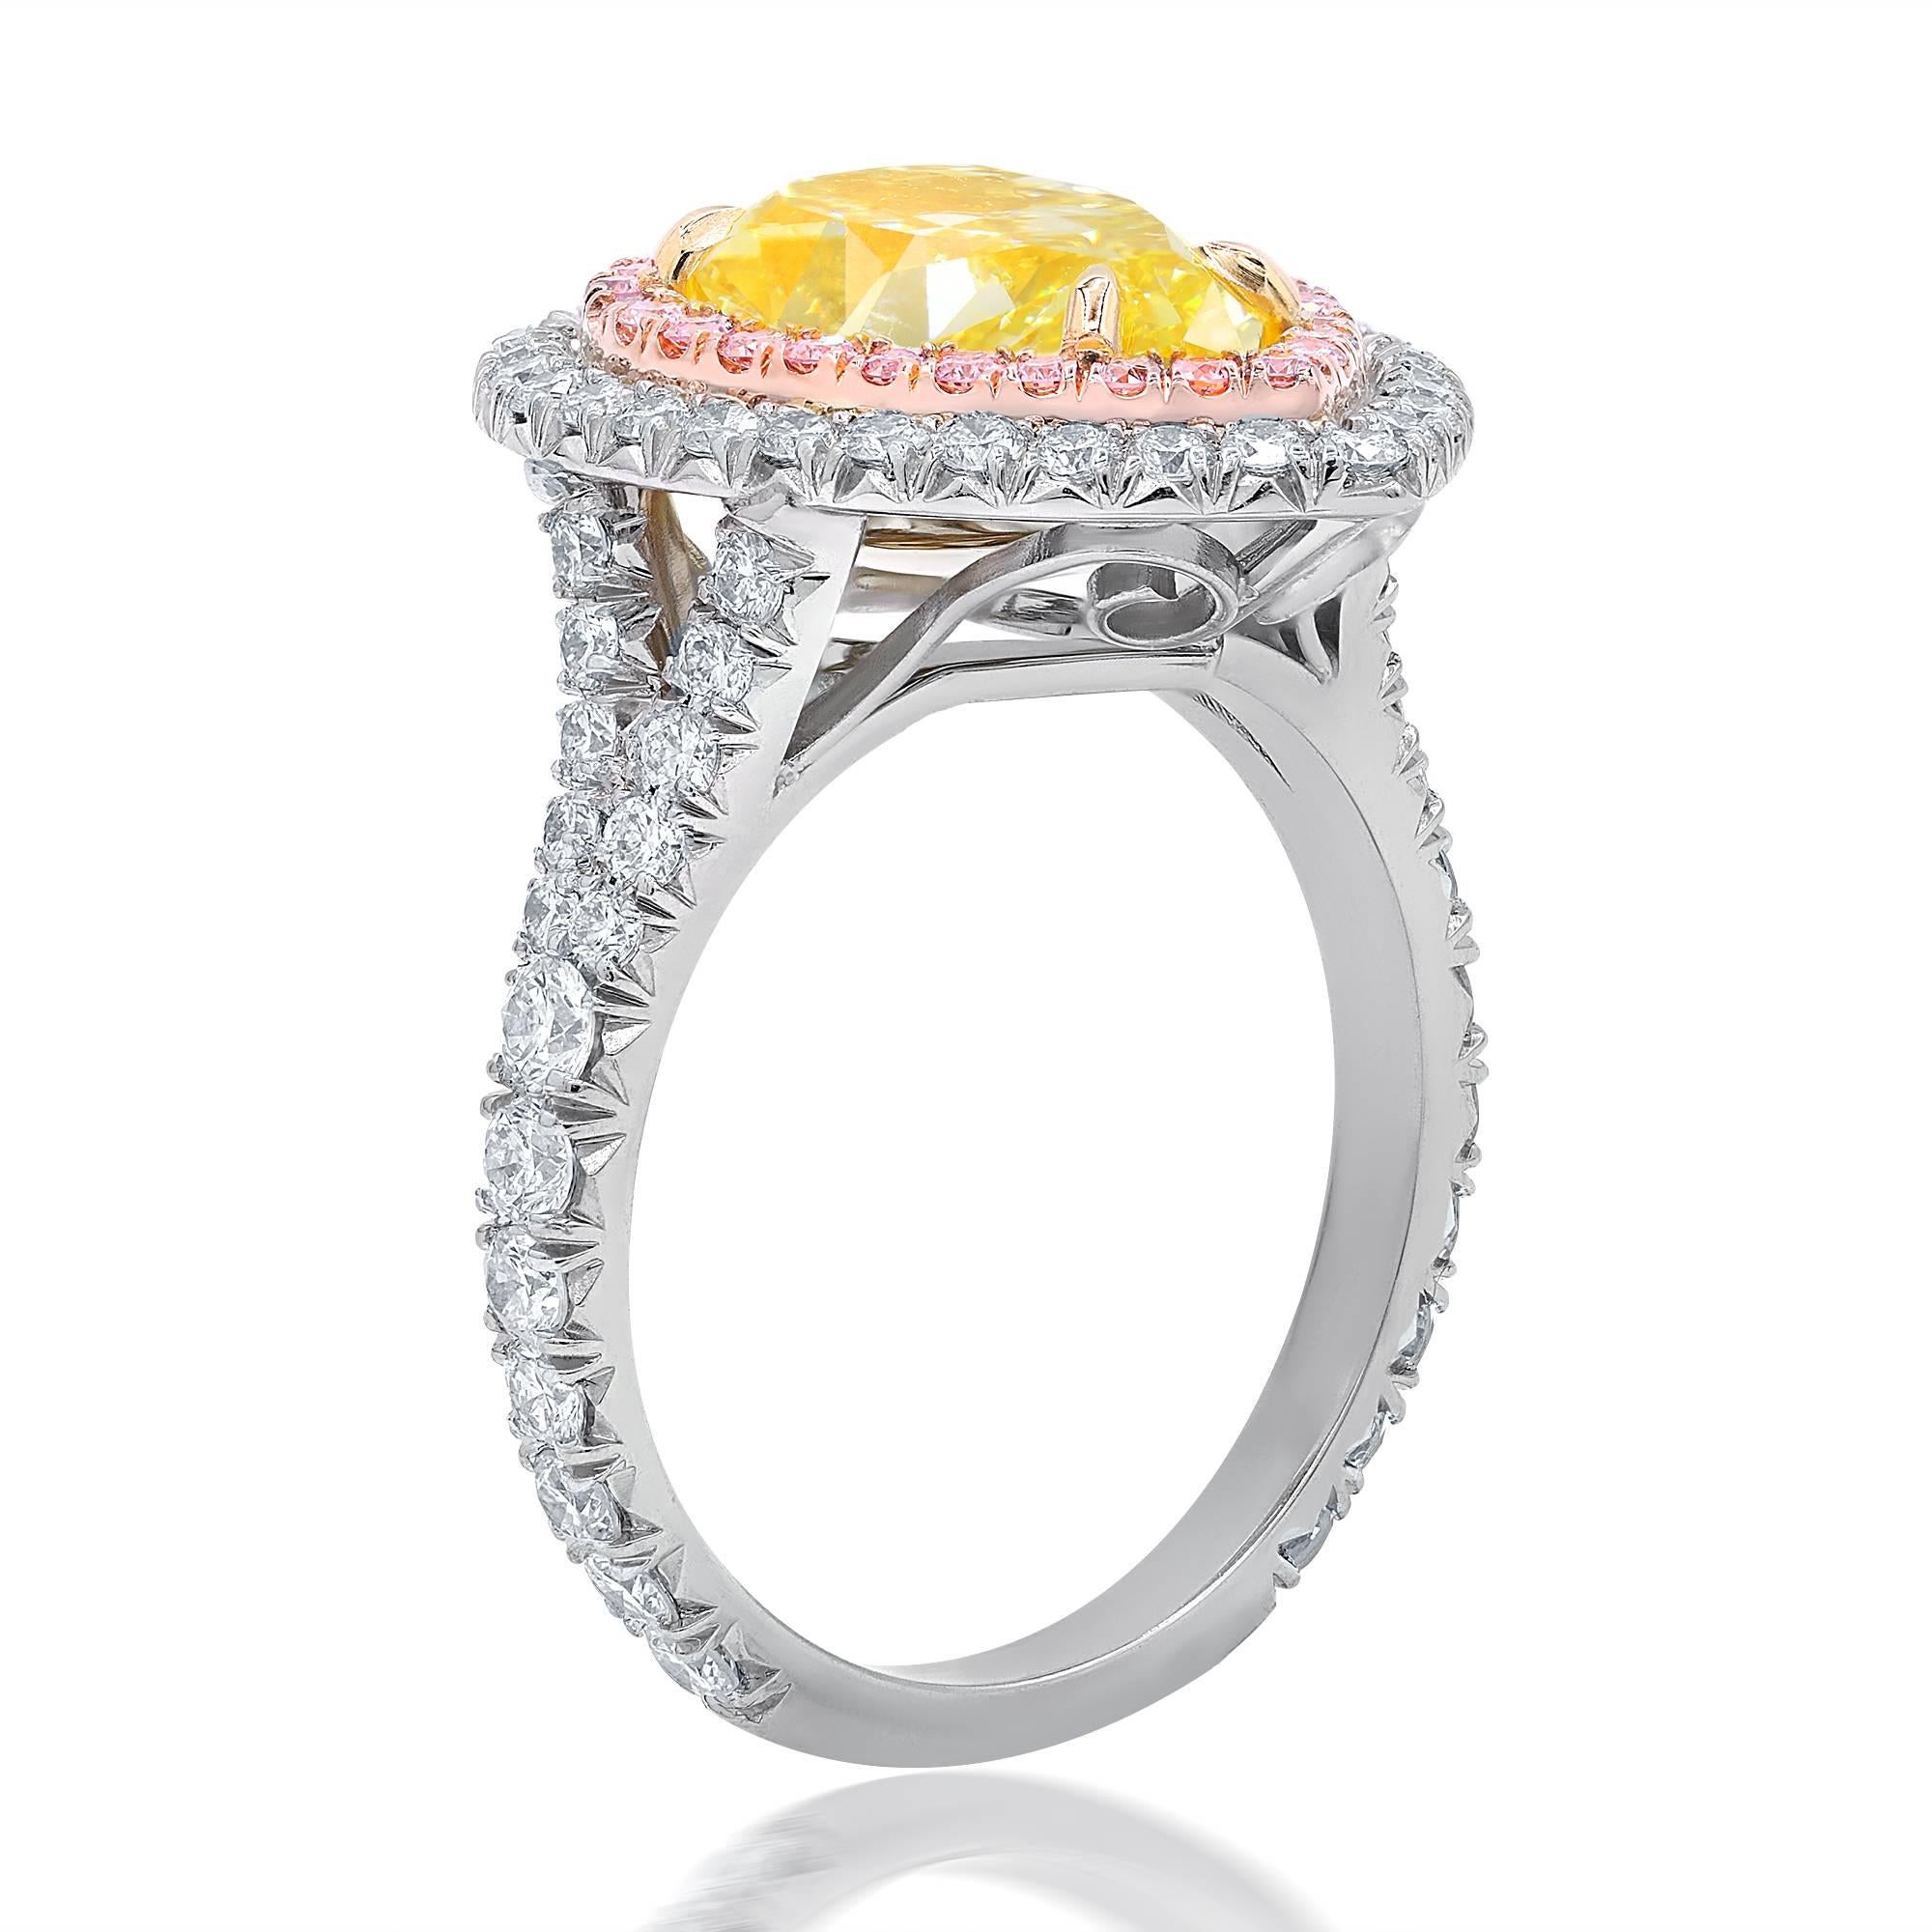 Custom designed diamond engagement ring with GIA certified natural fancy yellow pear brilliant  cut diamond in the center,weighing 3.50 carats VS2 clarity set in double halo mounting with 1.25 carats total of pink and white round brilliant cut